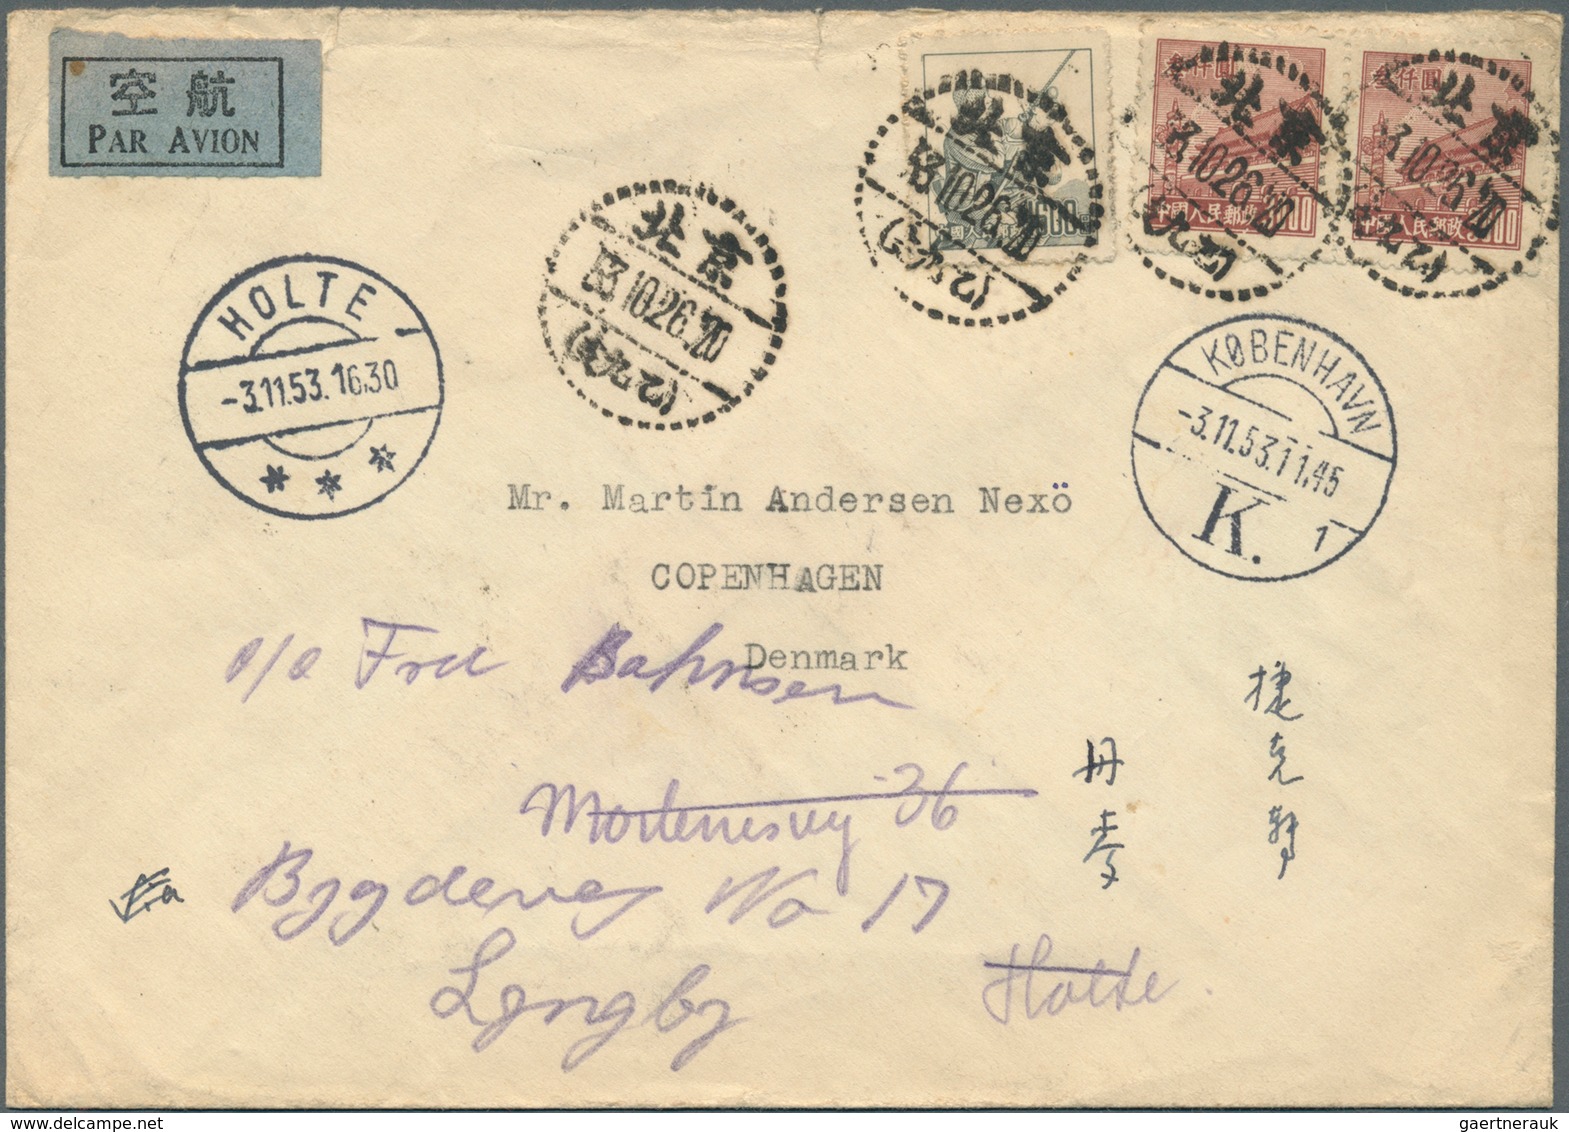 00328 China - Volksrepublik: 1950/53, five air mail covers with Tien An Men issues inc. four registered to